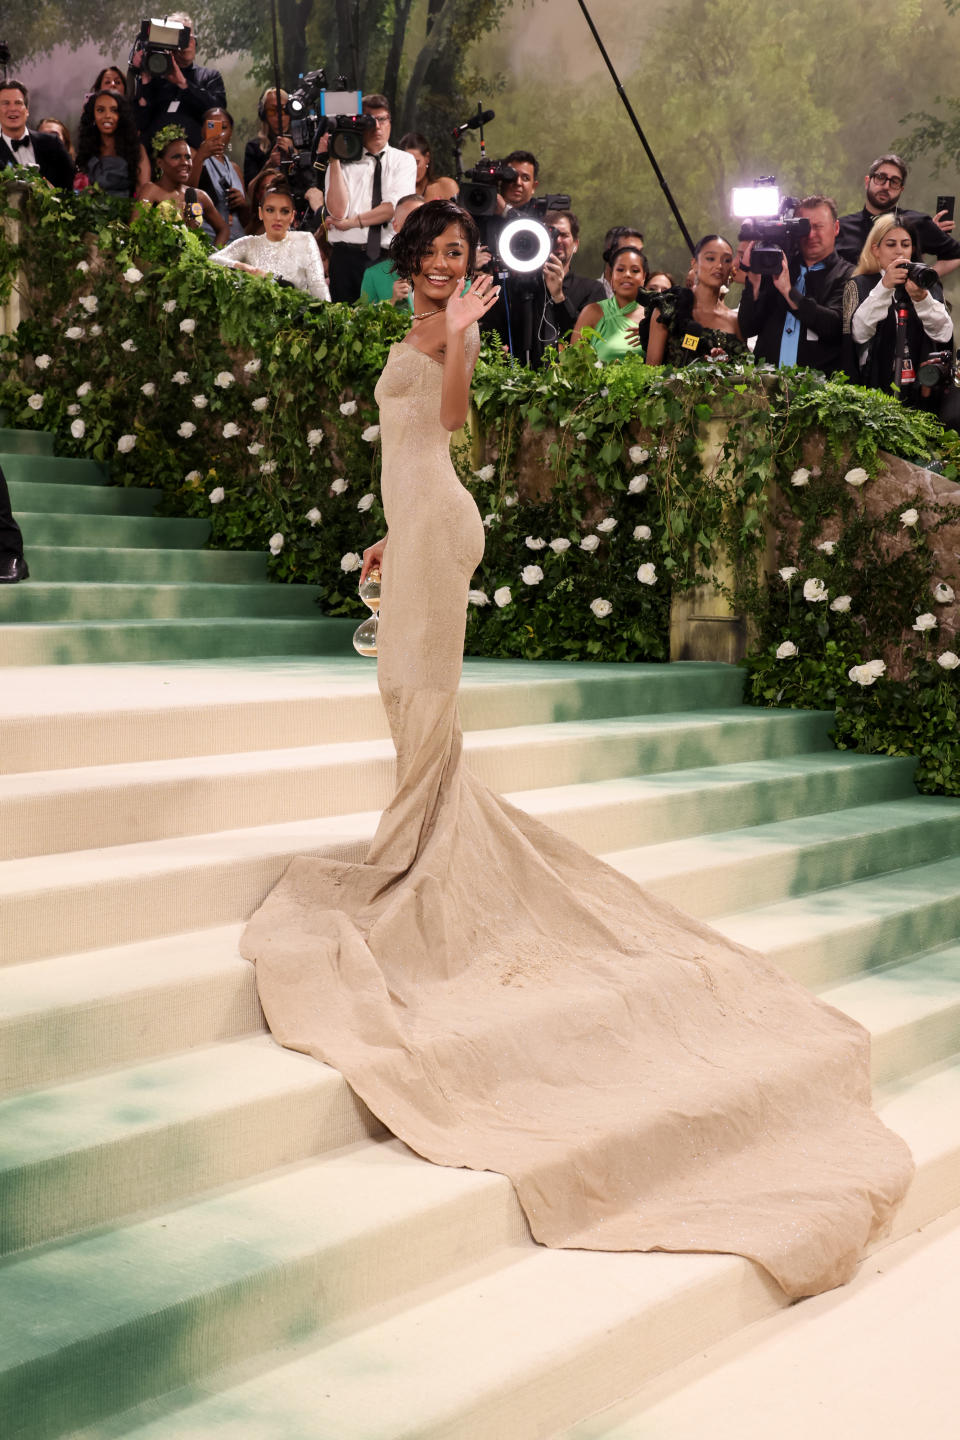 Tyla posing on the Met Gala steps showing her gown's long train